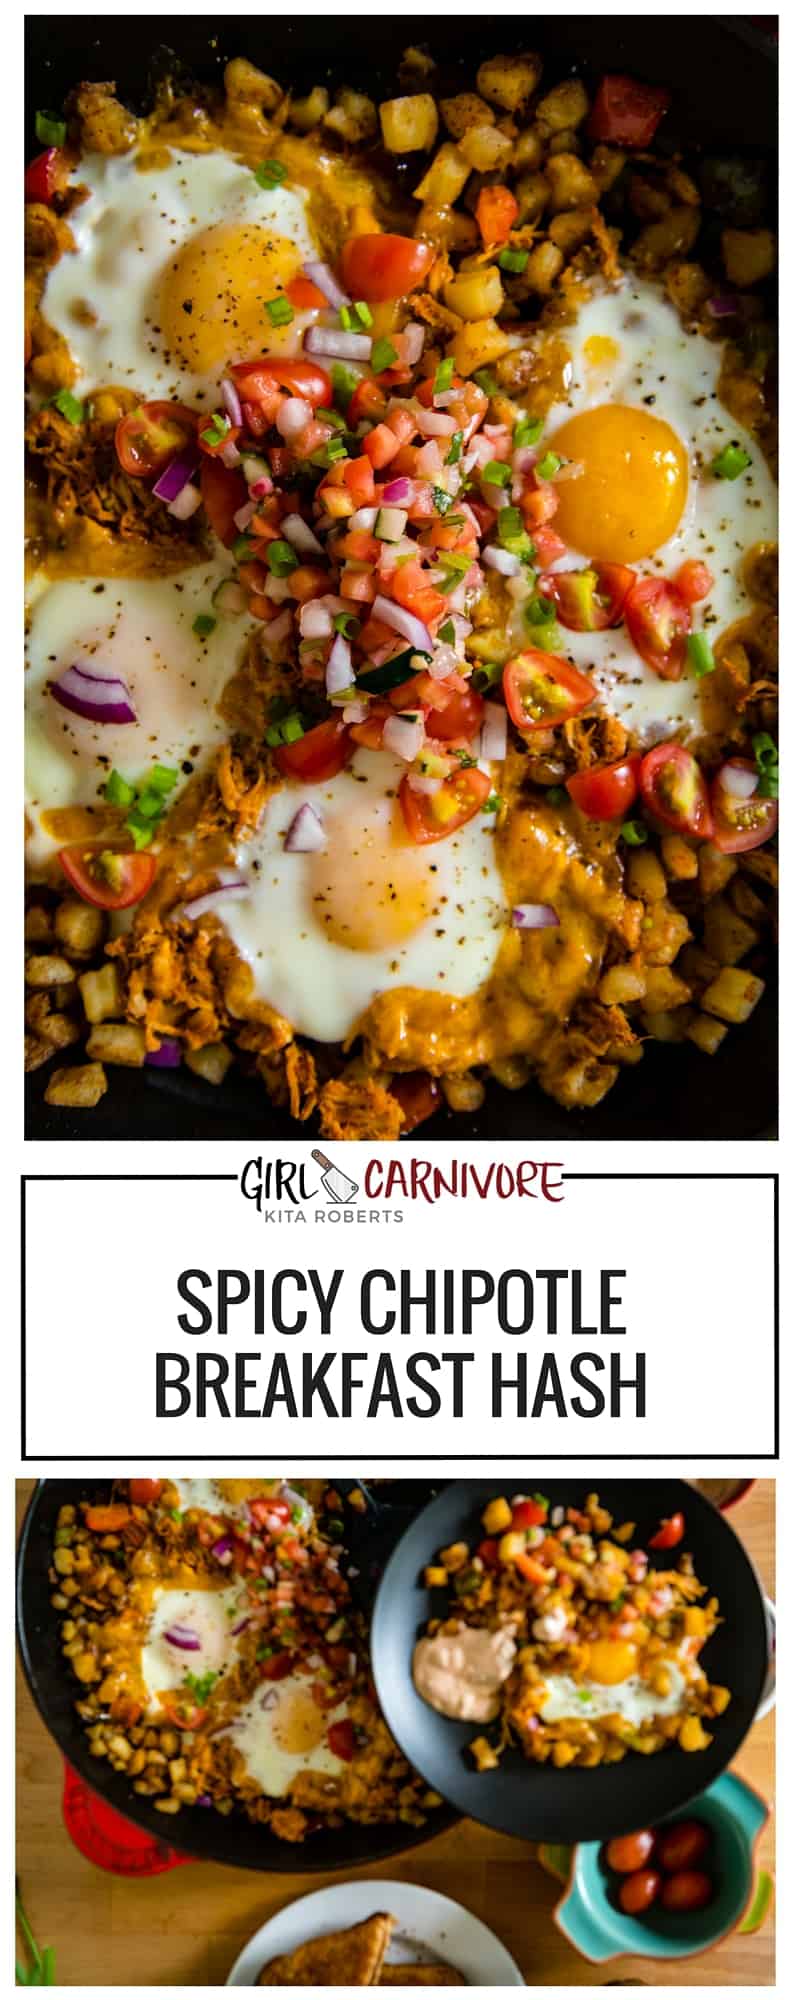 Spicy Chipotle Breakfast Hash Browns - A great way to use up leftovers and make an epic breakfast for the family! This one uses just a few russet potatoes and fresh eggs for a quick delicious meal - perfect for weekend brunching. 